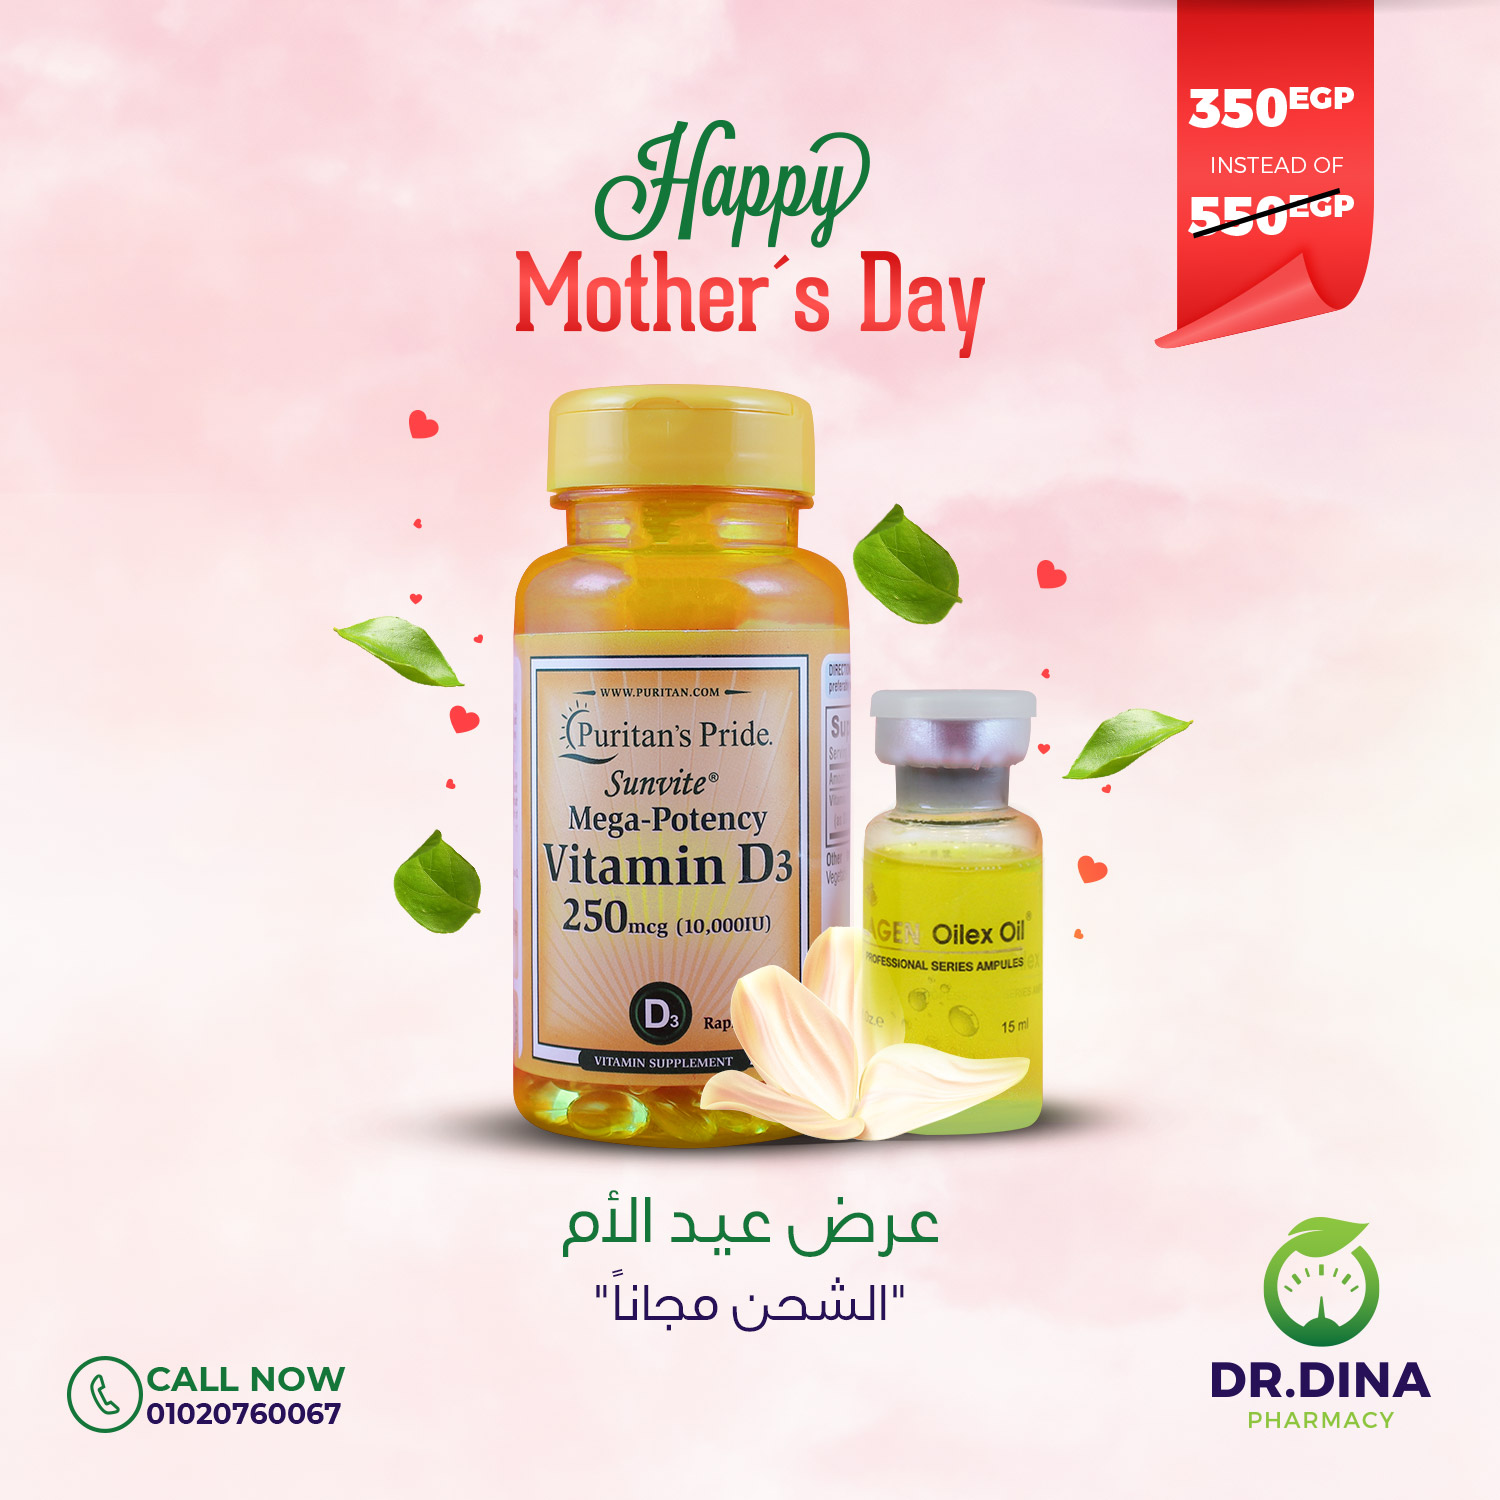 Dr.Dina Baby Advice Campaign Social Media Campaign Mother Caring